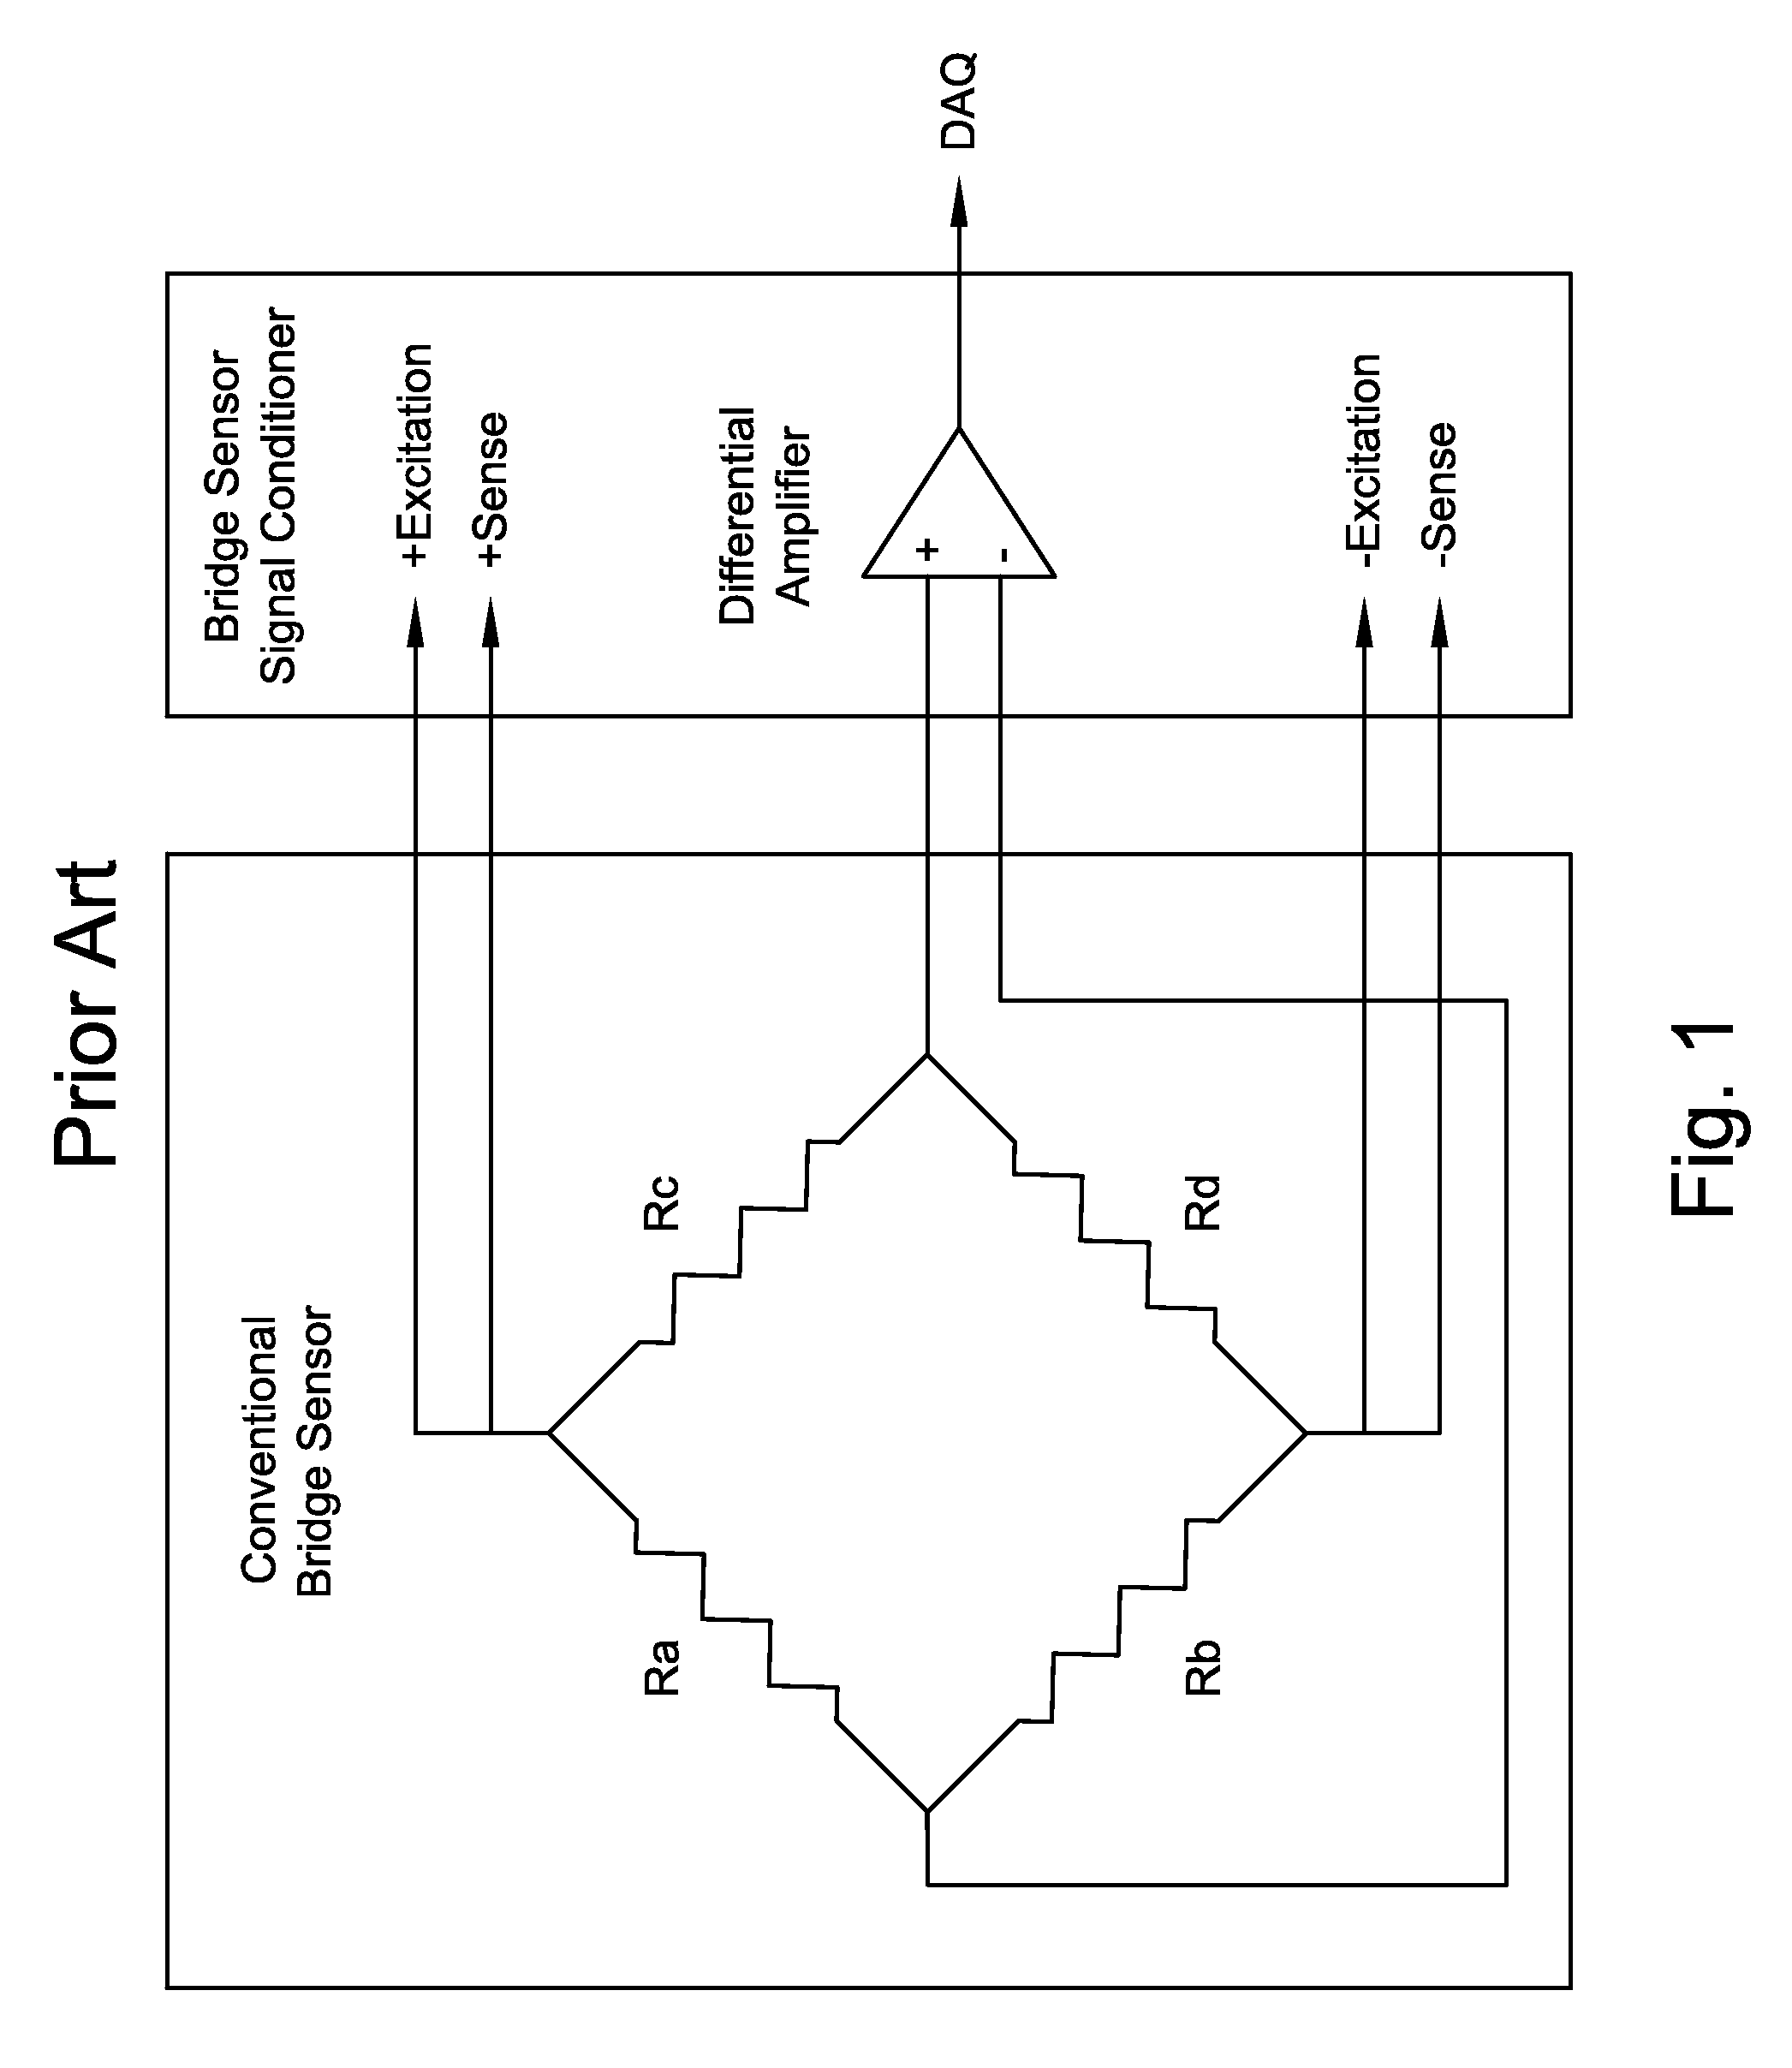 Bridge sensor with collocated electronics and two-wire interface